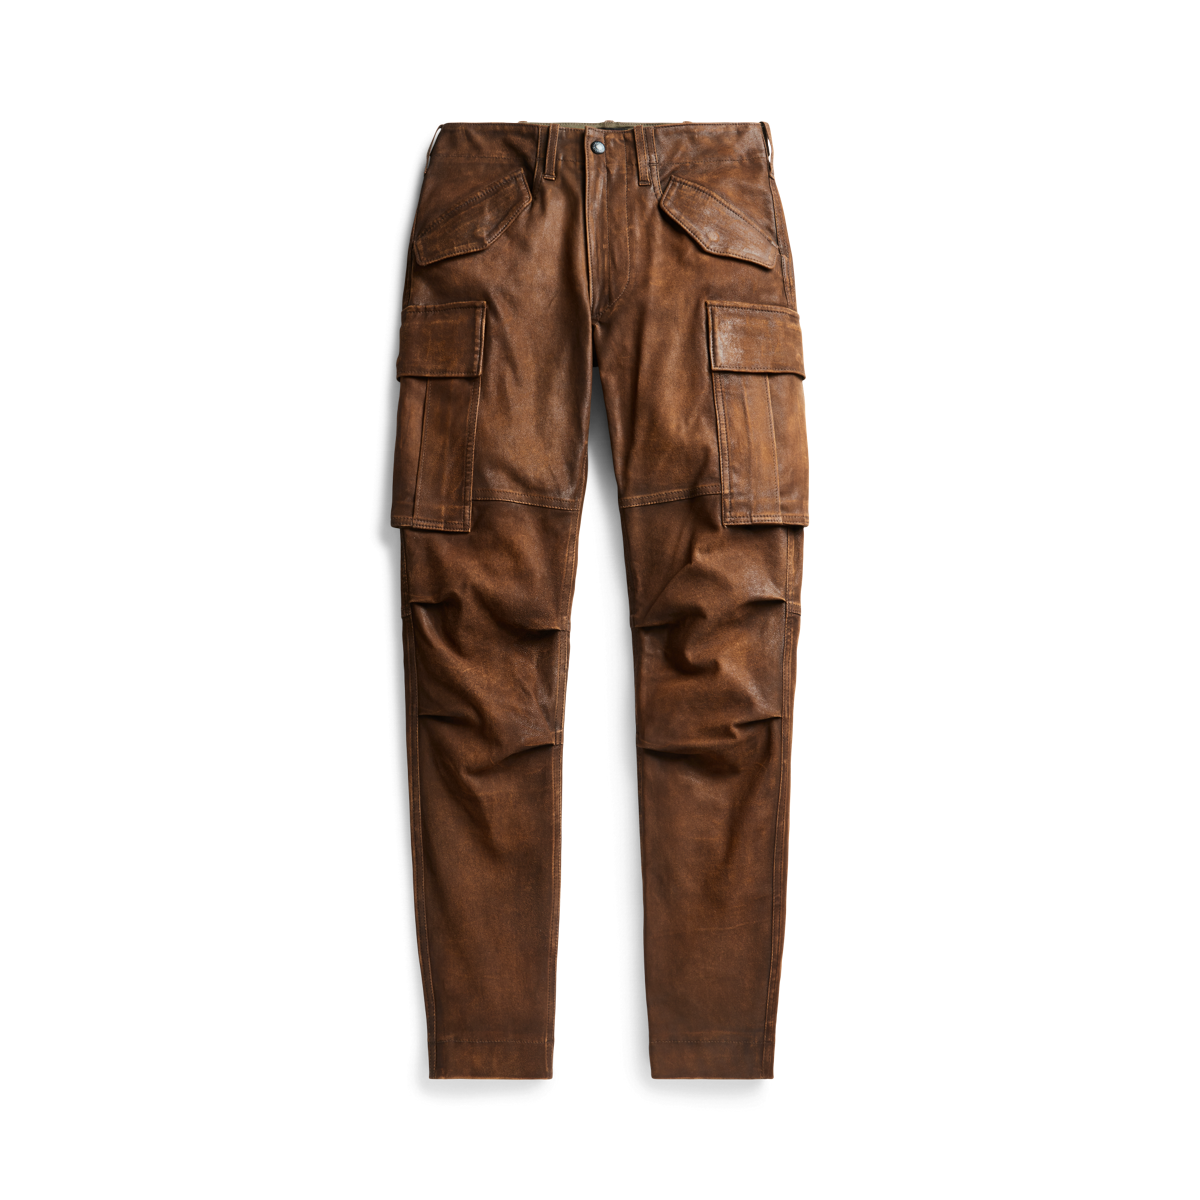 Ralph Lauren Womens Blue Label Cargo Pant with Leather Accents